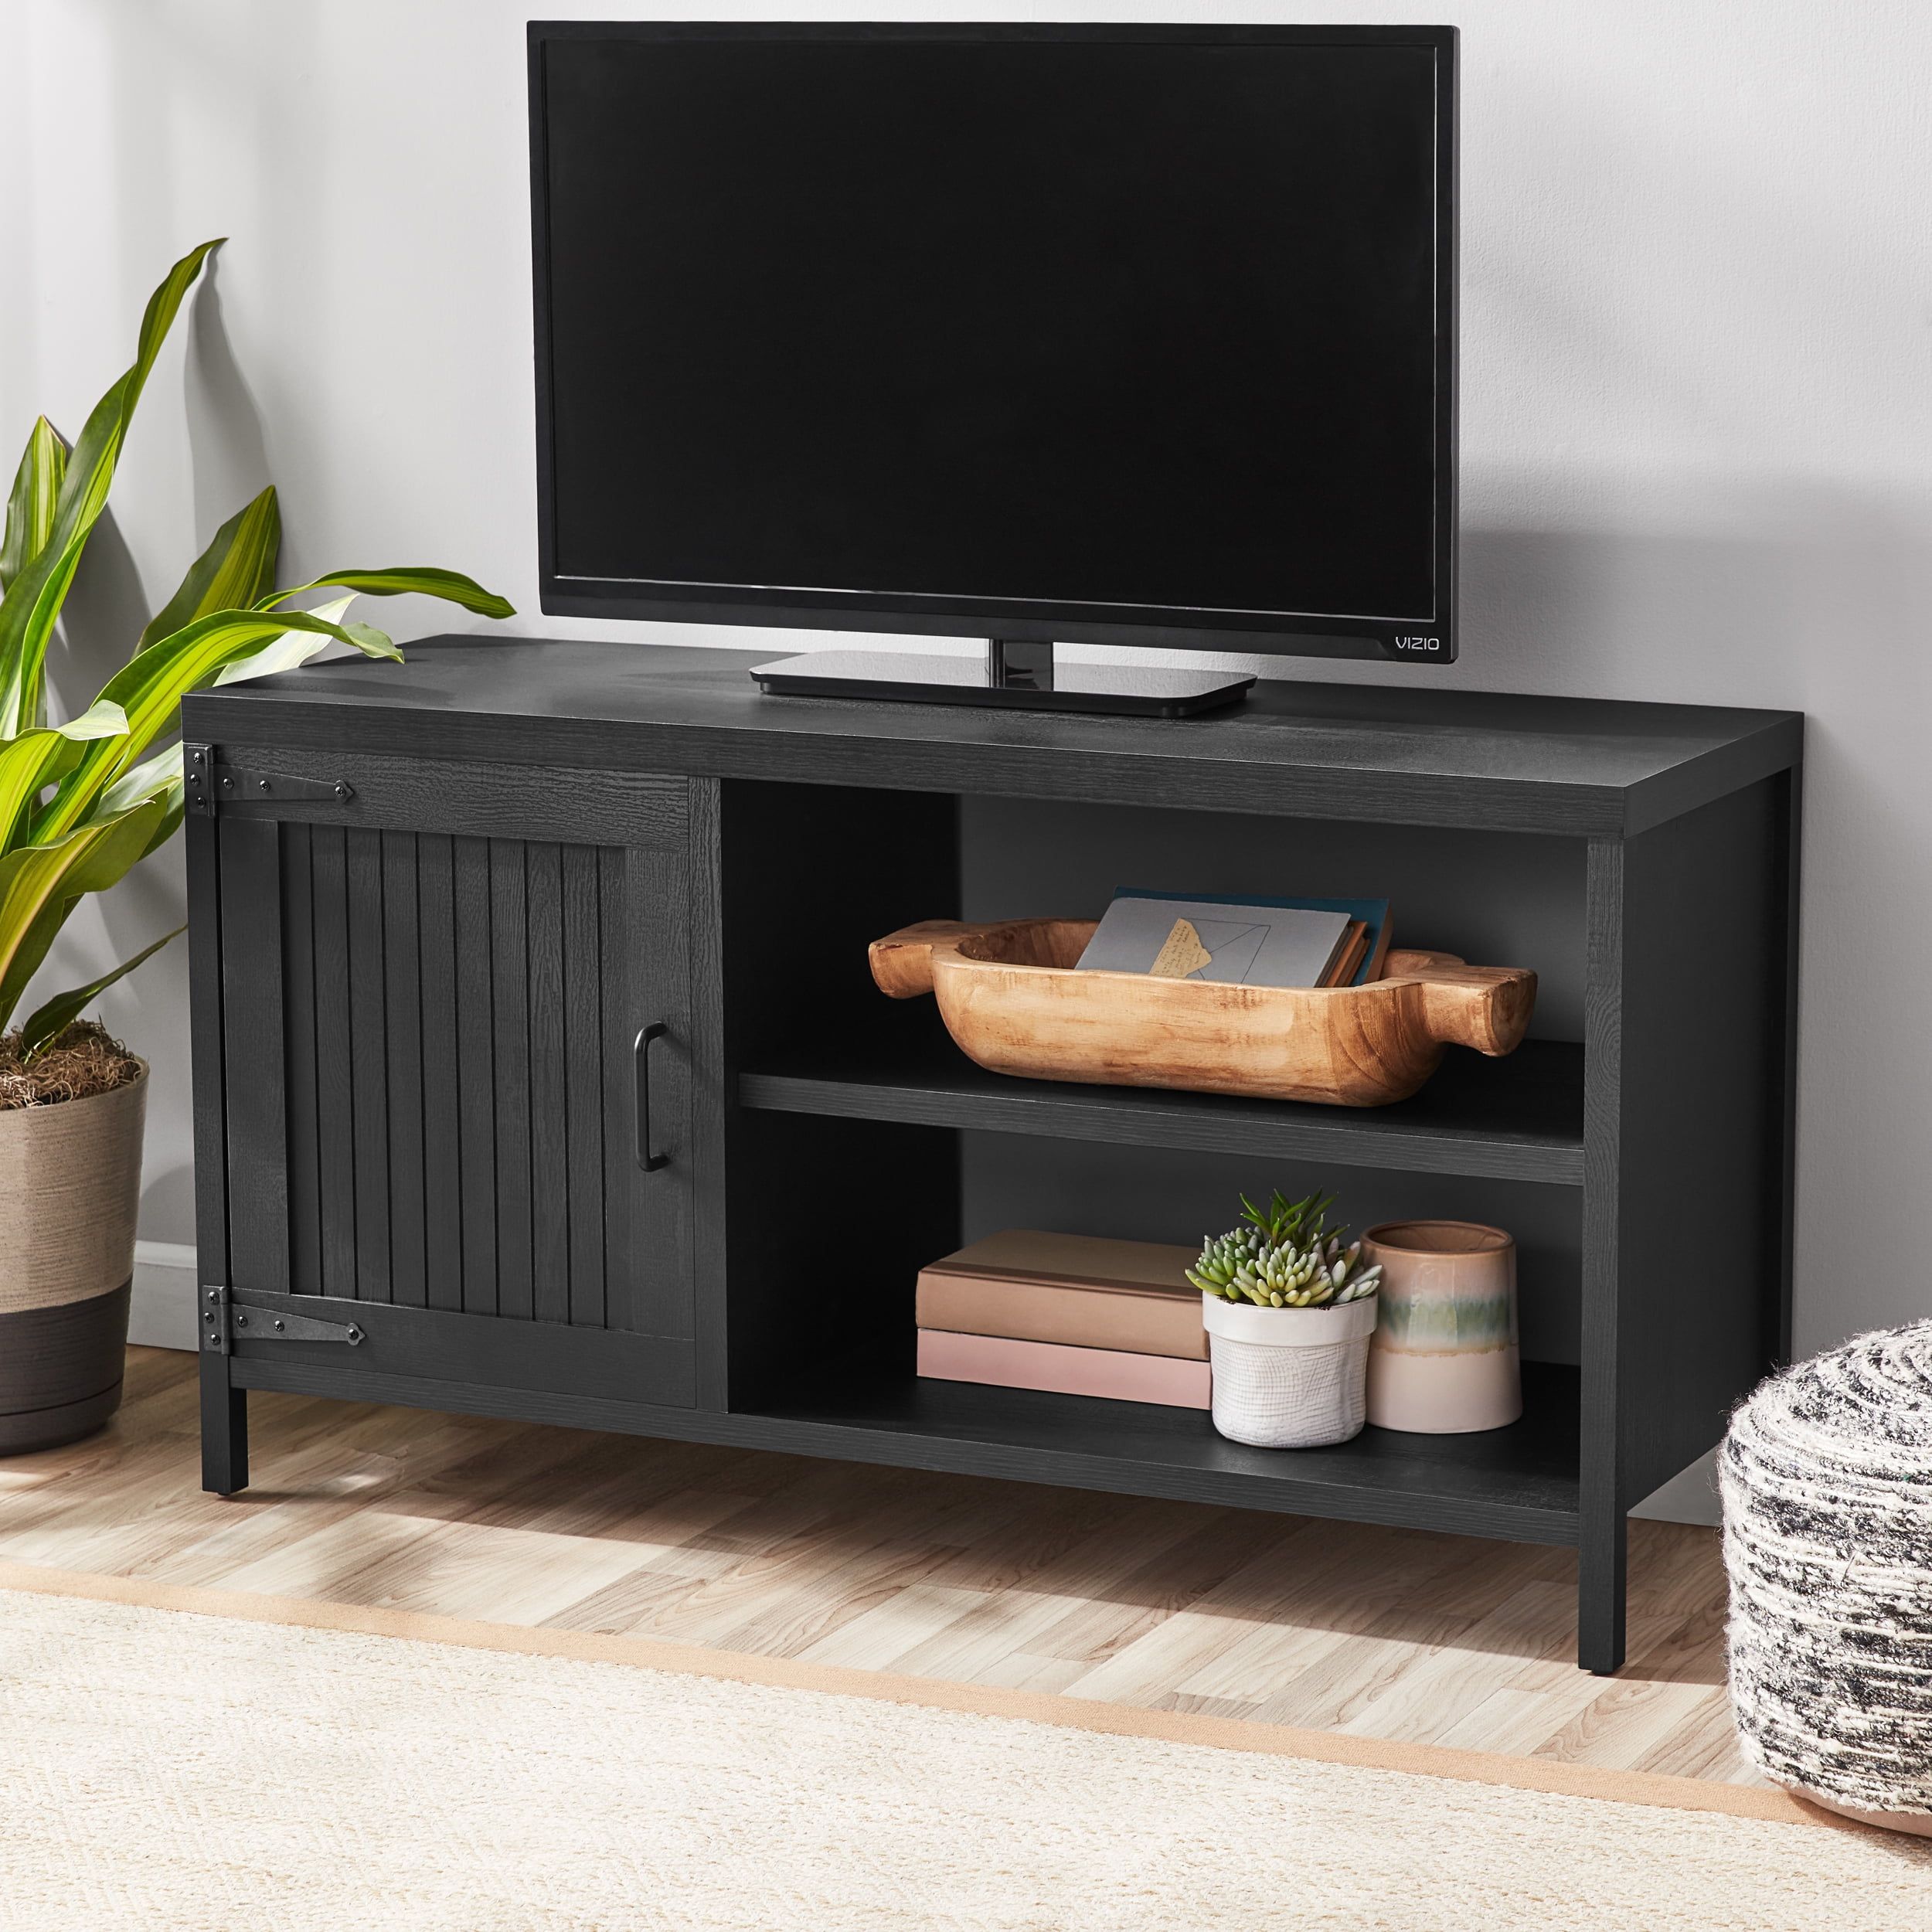 Mainstays Farmhouse Tv Stand For Tvs Up To 50", Black – Walmart Pertaining To Farmhouse Stands For Tvs (View 10 of 15)